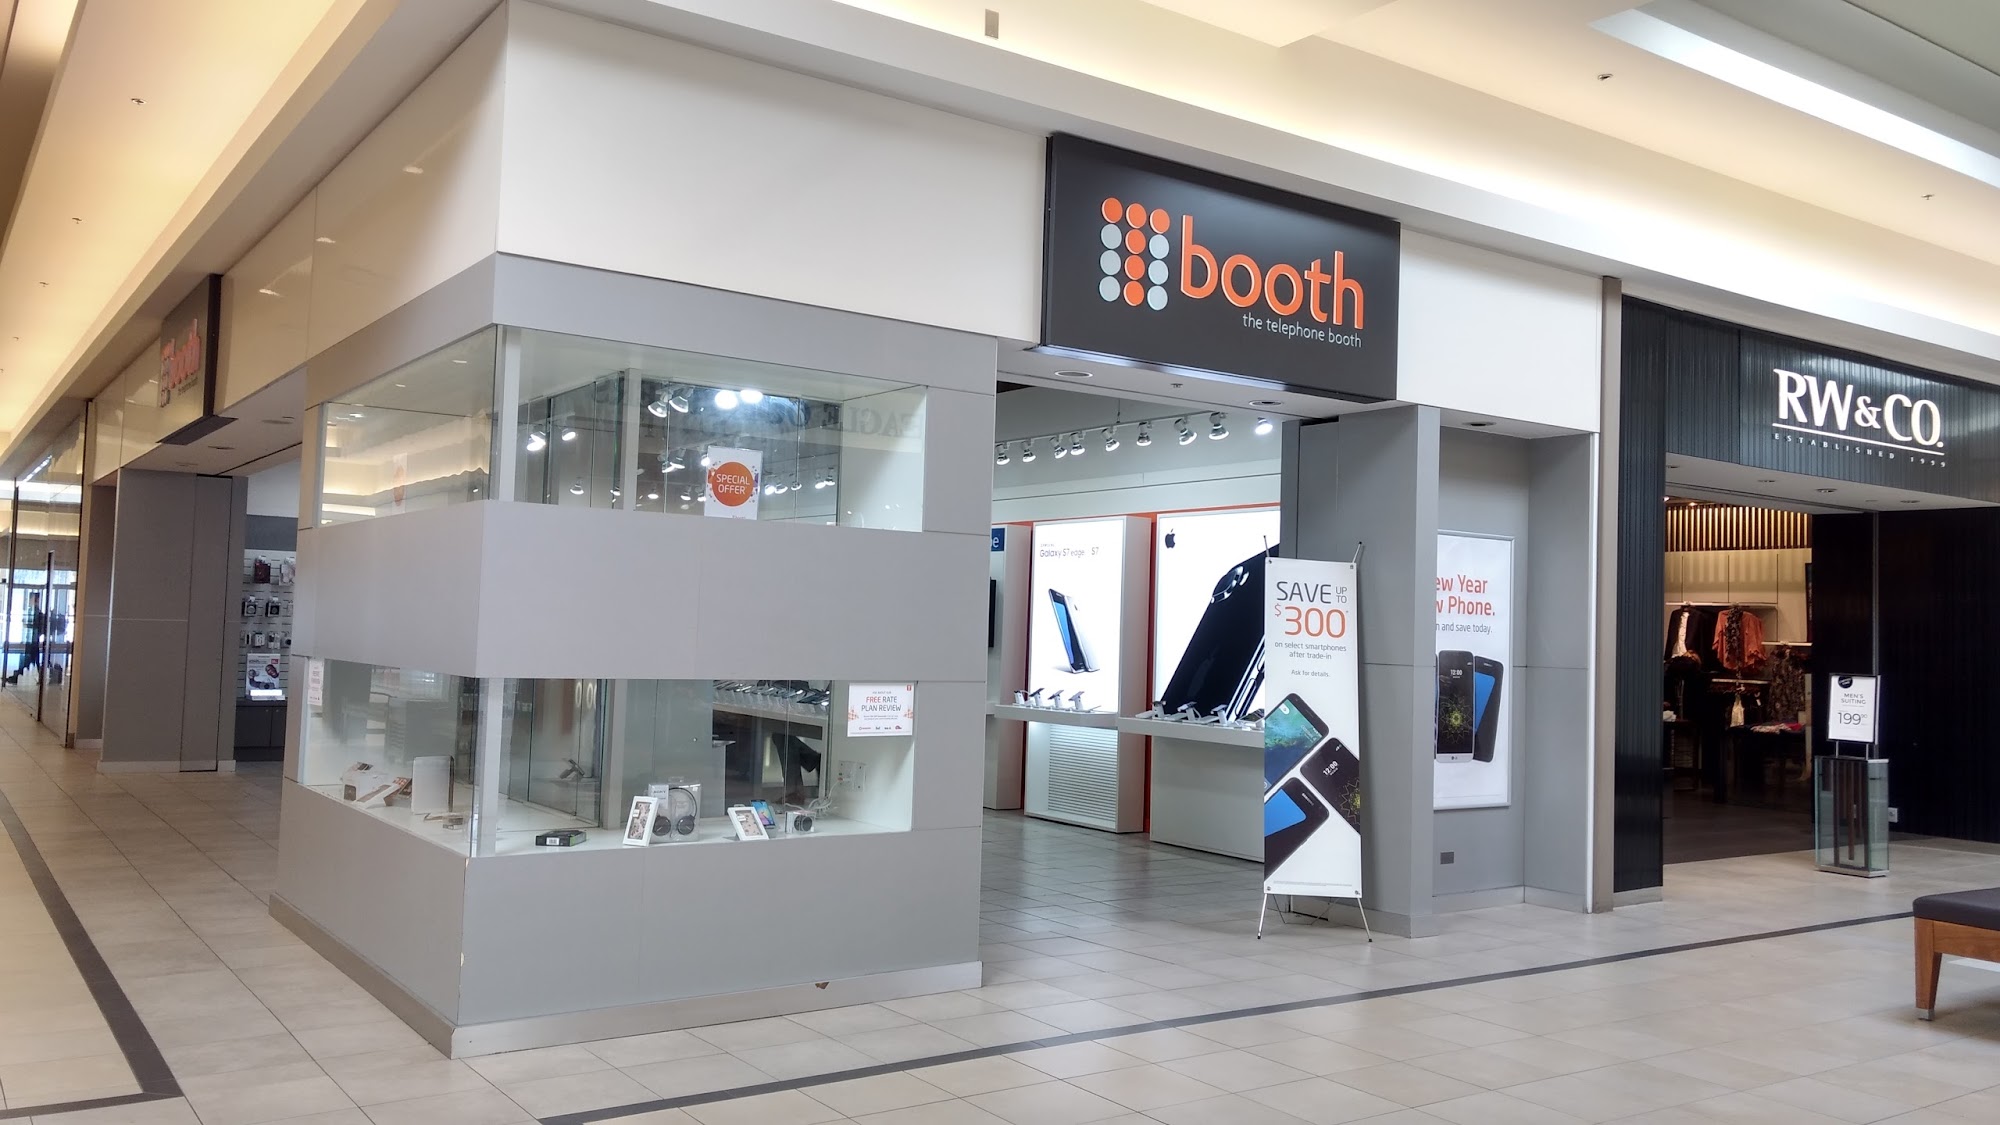 tbooth wireless | Cell Phones & Mobile Plans